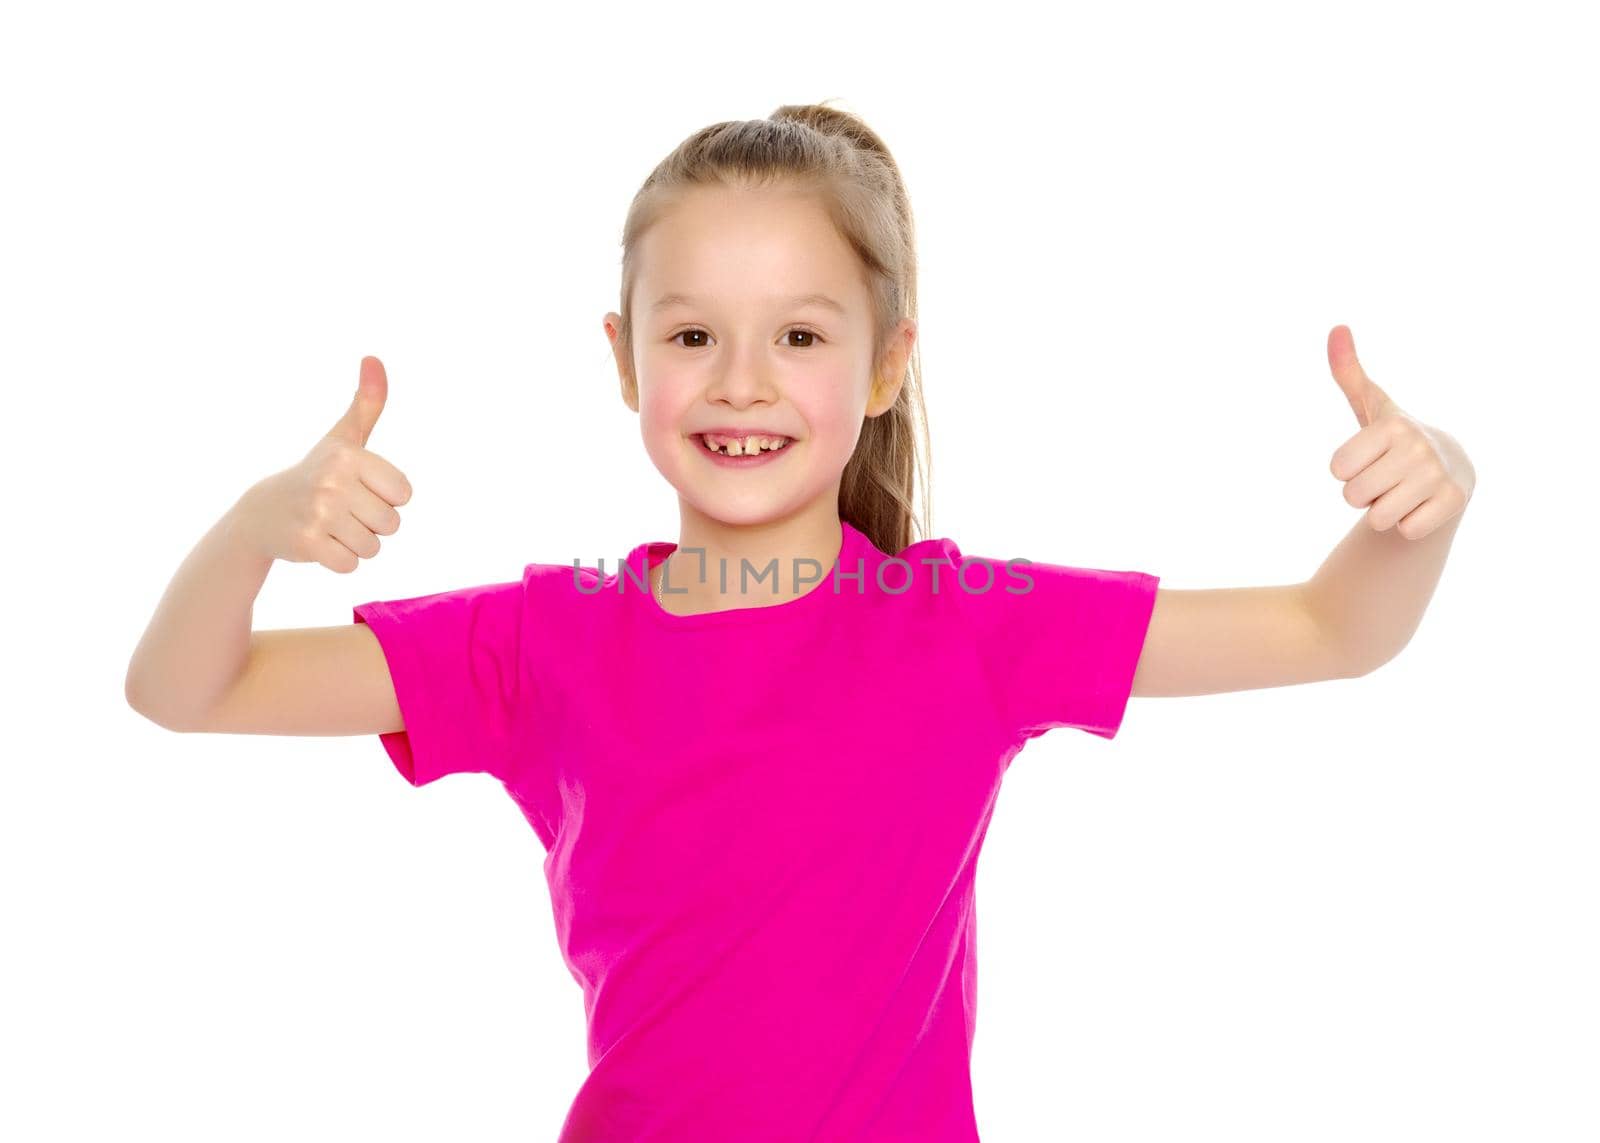 Little girl holding her thumb up. Concept Happy childhood, holiday, birthday.Isolated on white background